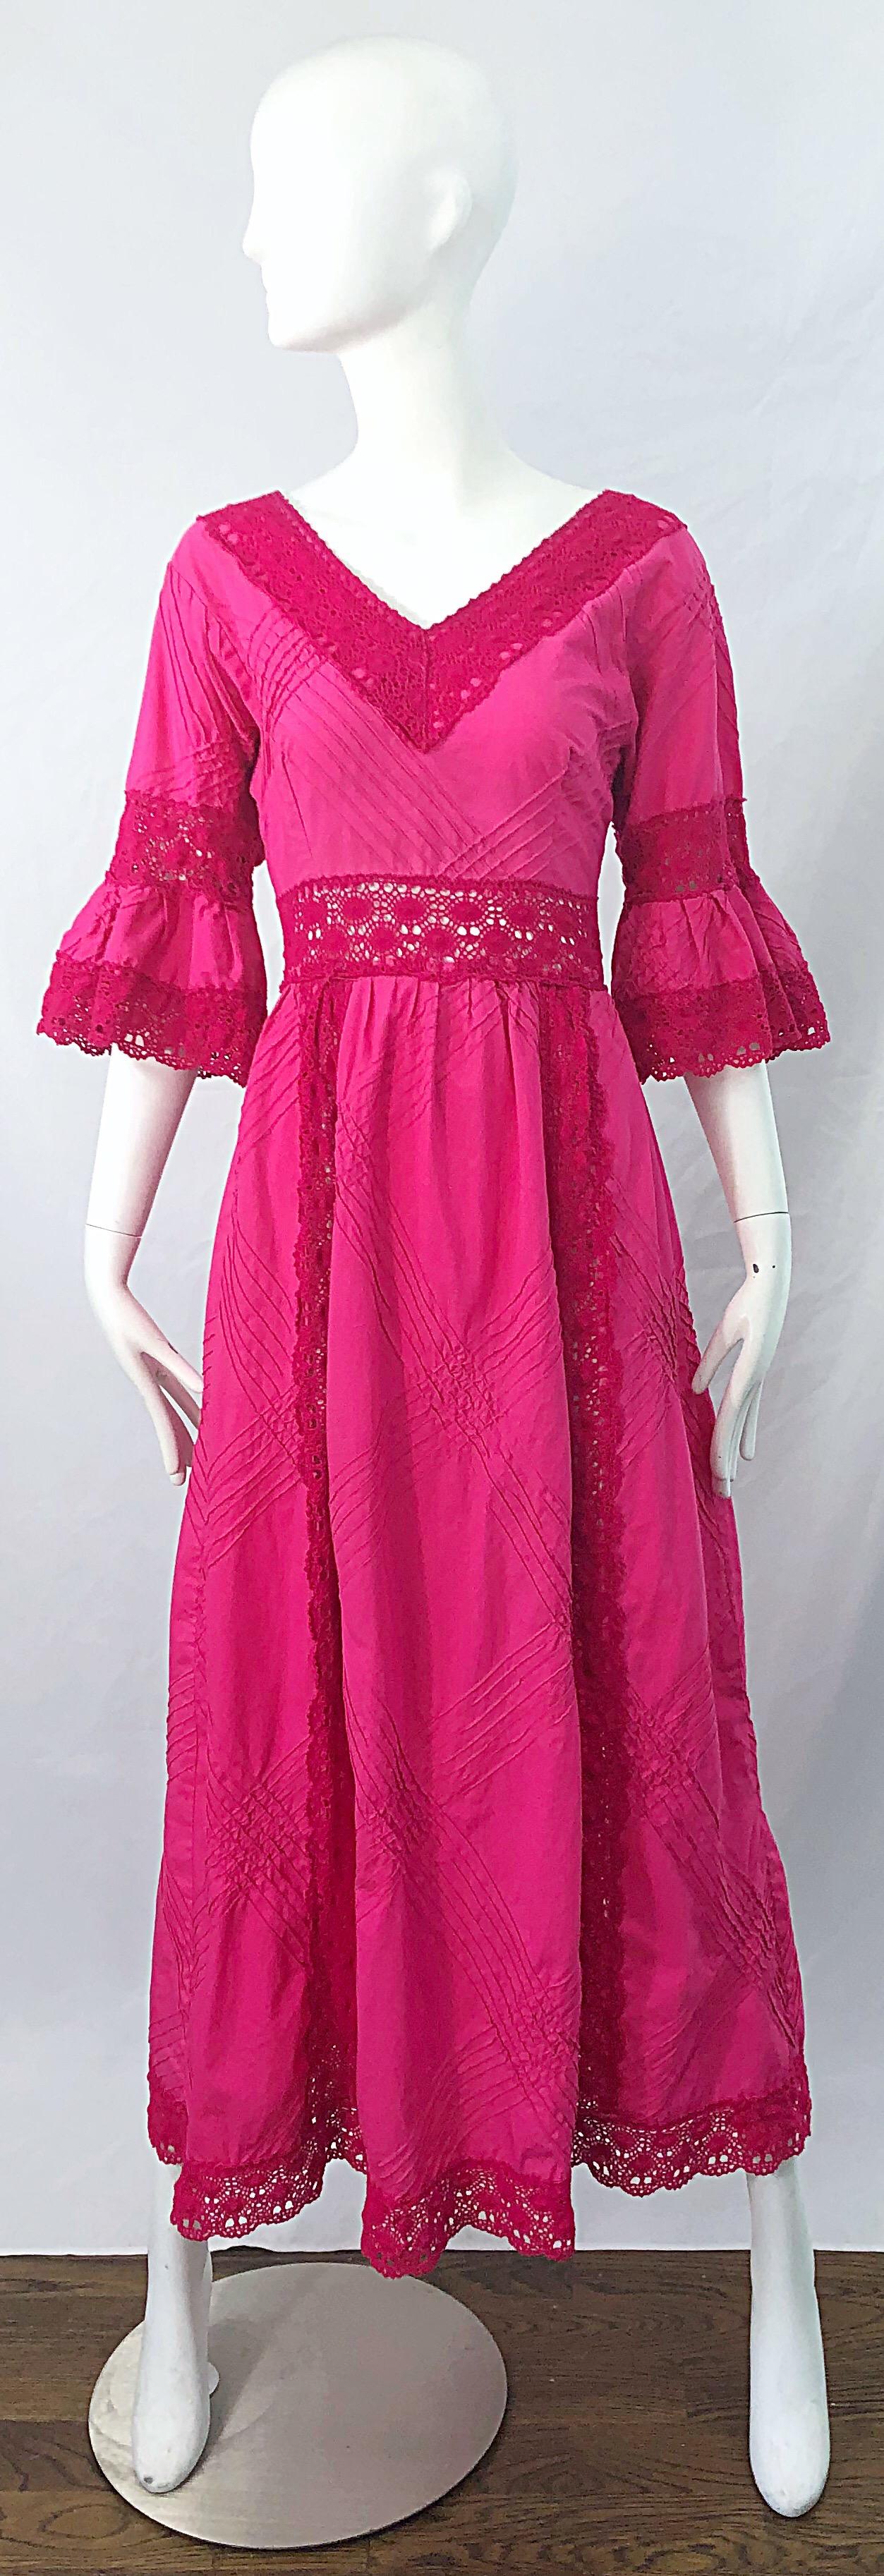 Chic 1970s TACHI CASTILLO hot pink 3/4 bell sleeve cotton crochet boho maxi dress ! Castillo was a Mexican designer who was famed for her textile works, and her ability to transform cotton for day jackets / dresses to evening dresses. This hot pink